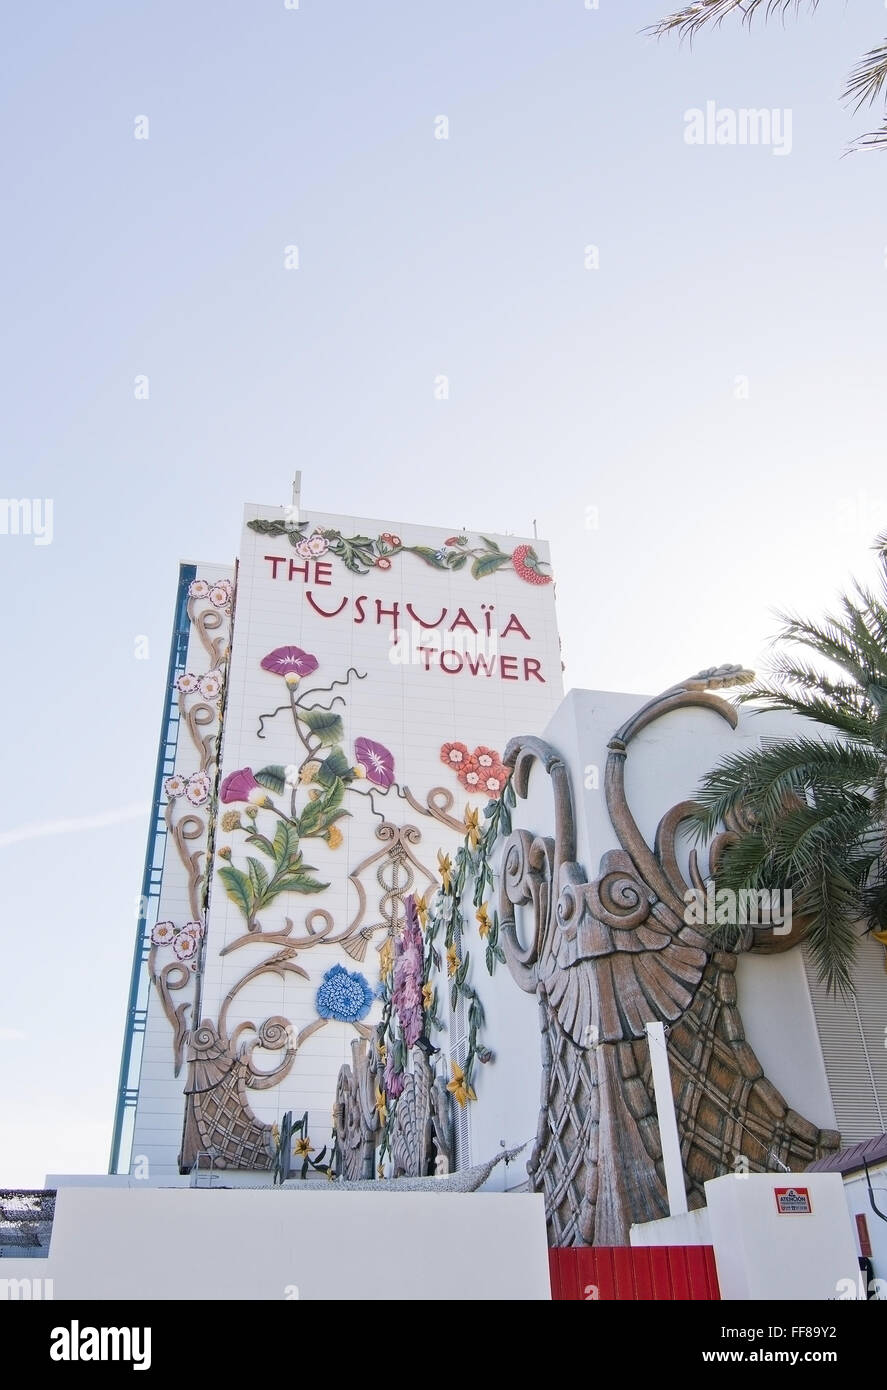 Ushuaïa Hotel floral decorated facade against blue sky on December 17, 2015 in Ibiza, Balearic islands, Spain Stock Photo